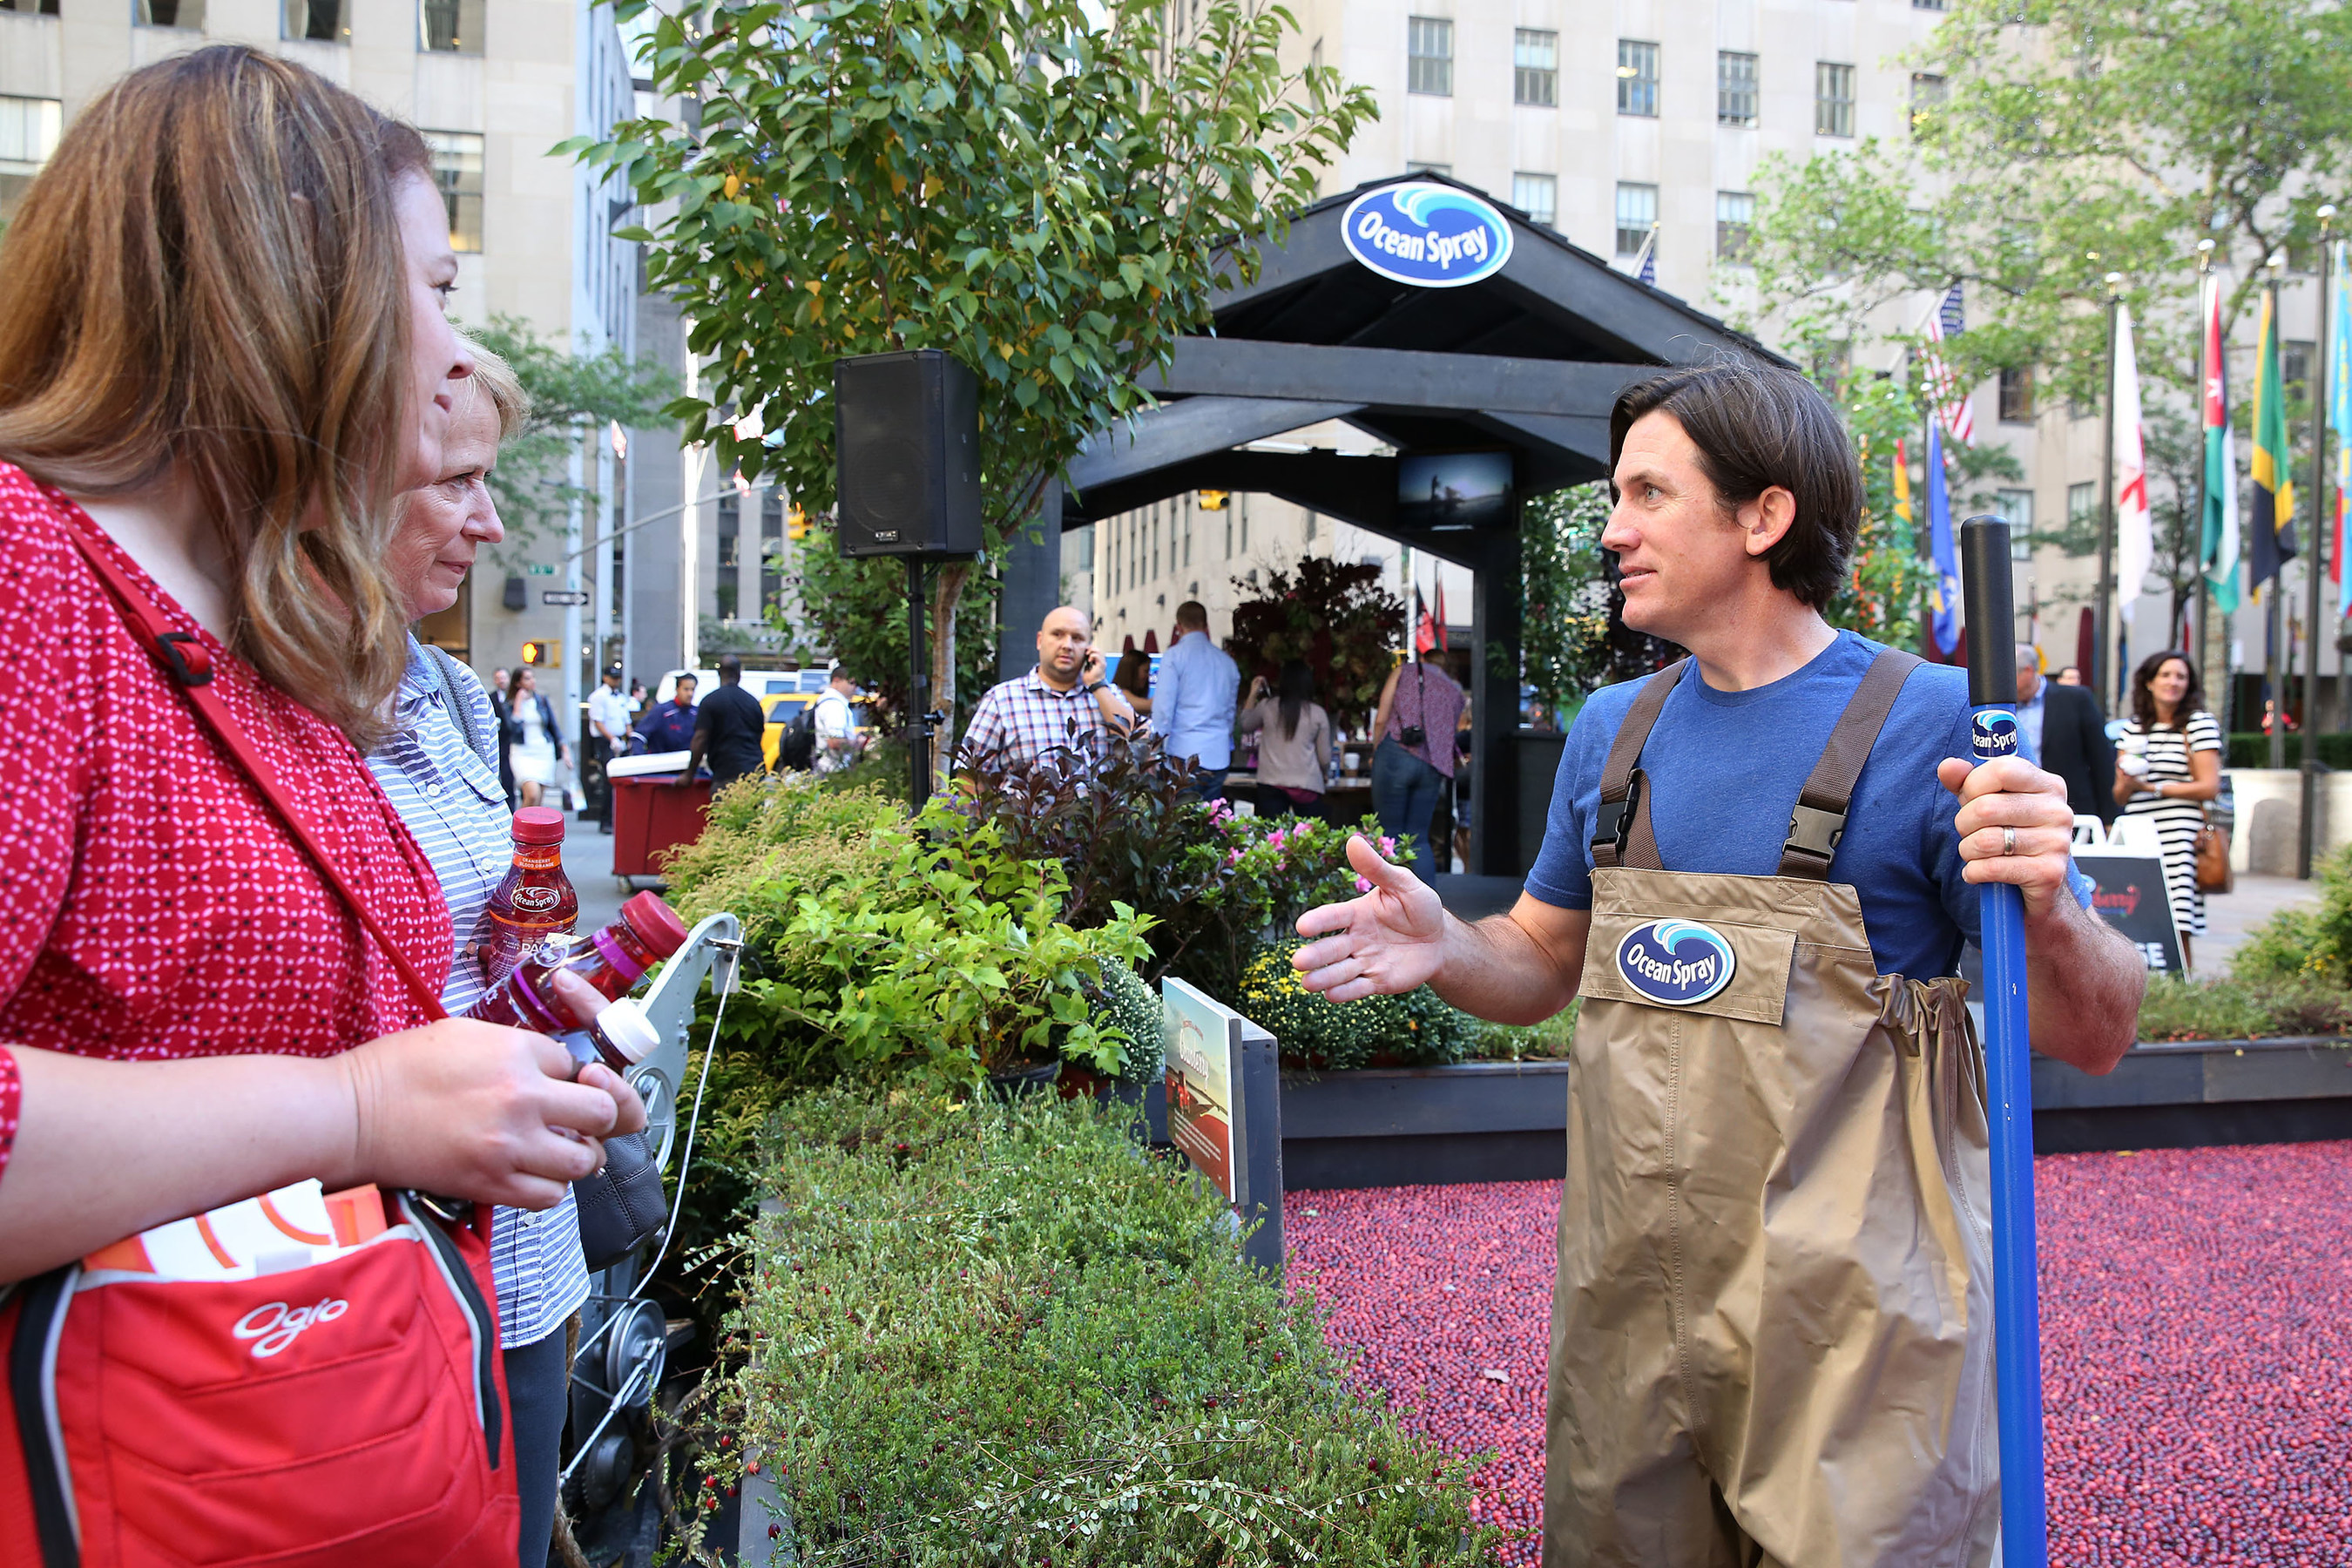 Ocean Spray, an official sponsor of the 2016 Forbes Under 30 Summit, will transform Boston's City Hall Plaza into a cranberry hub for fresh thinking October 16-19, 2016. The cooperative, comprised of 700 family farms, will fuel discussions around science, technology and innovation between summit attendees and multi-generation cranberry growers from inside its cranberry bog display.